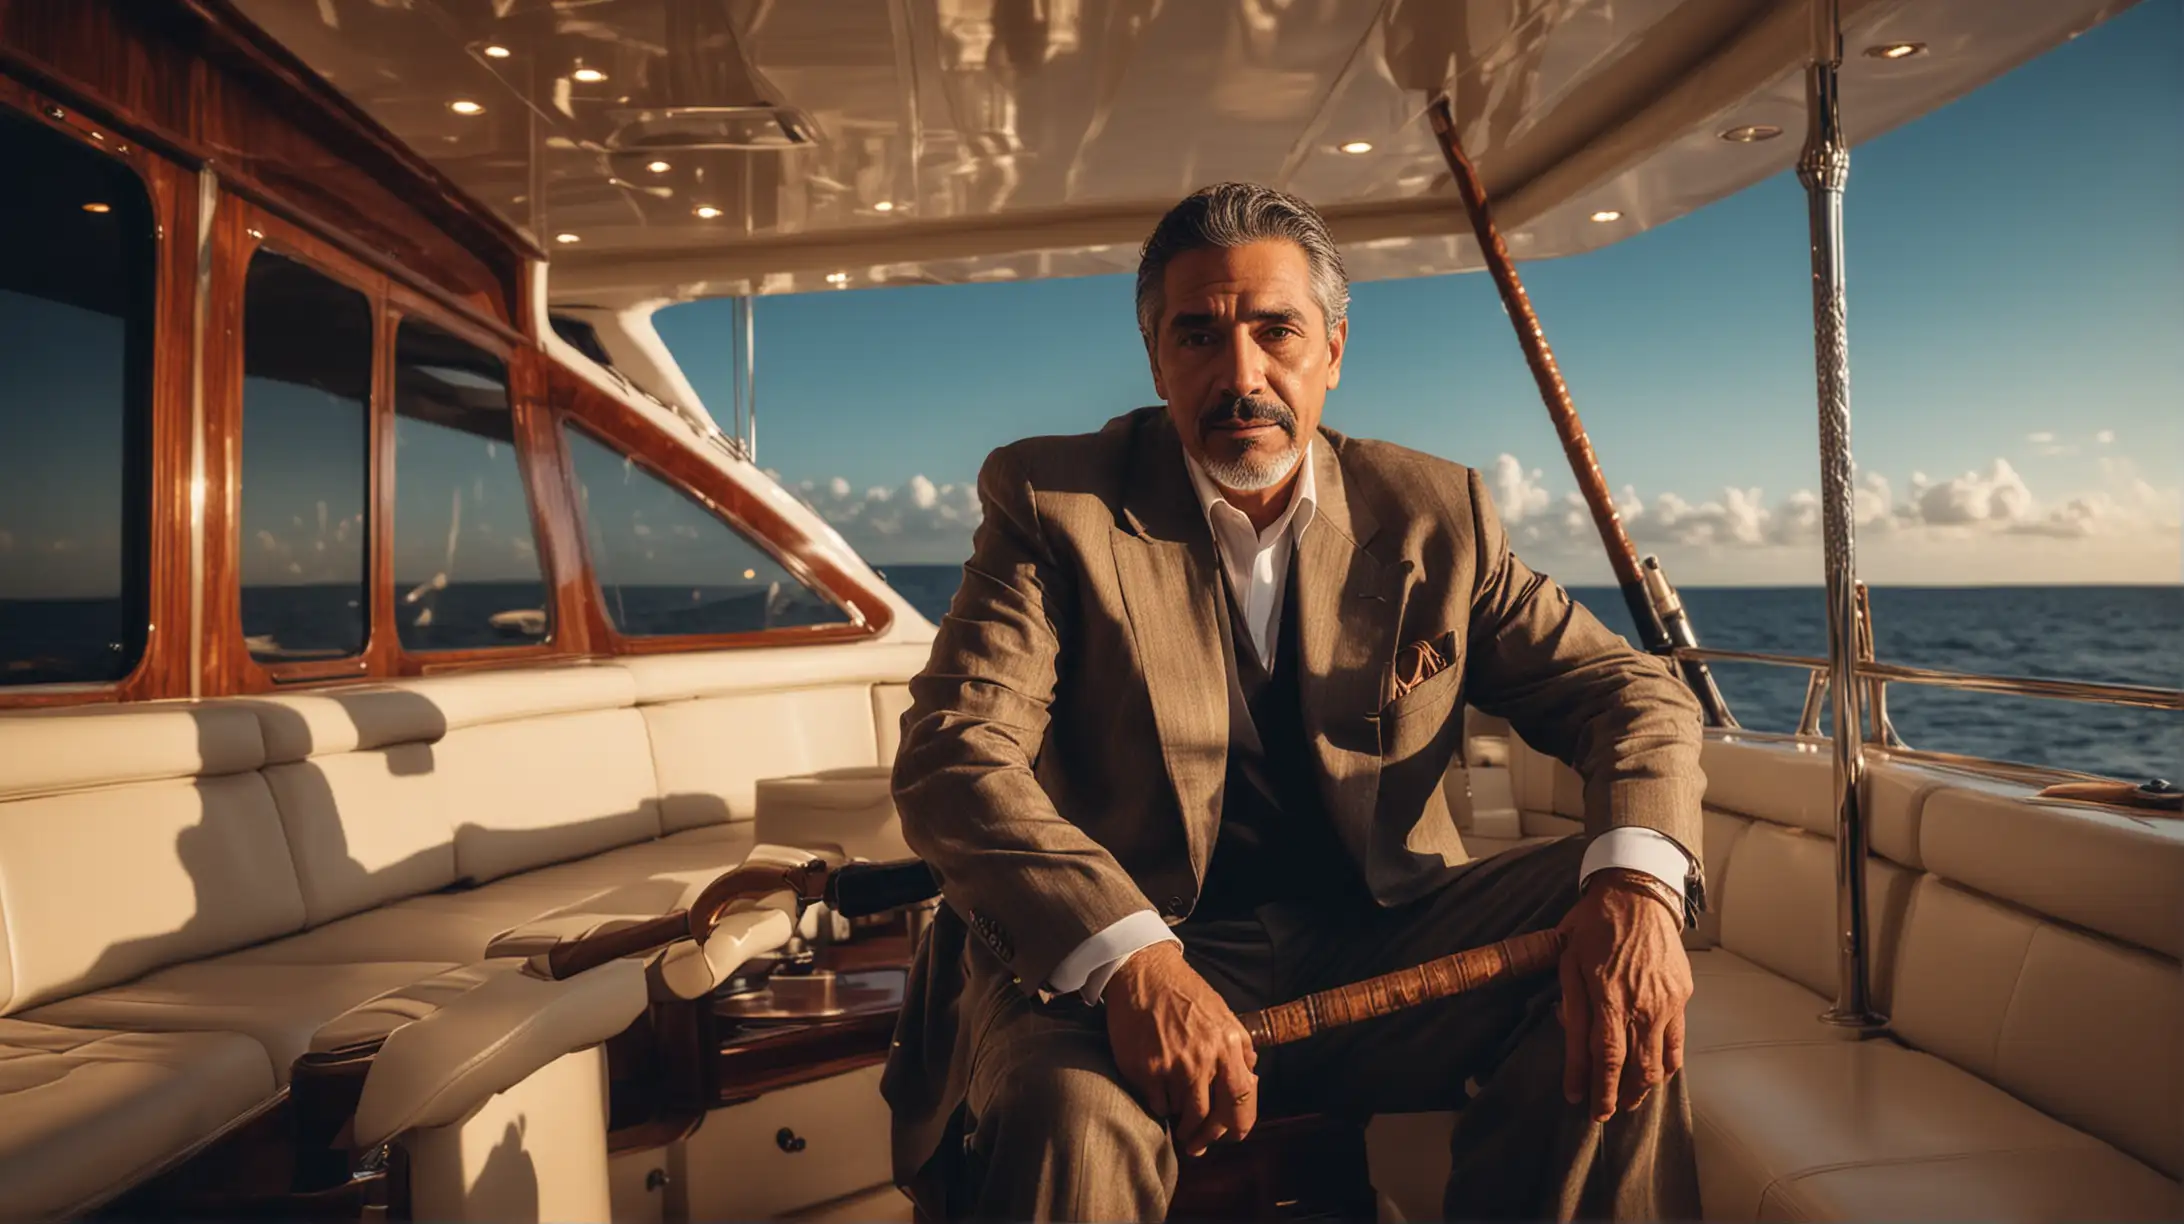 Hispanic Man Relaxing on Opulent Yacht with Dramatic Lighting